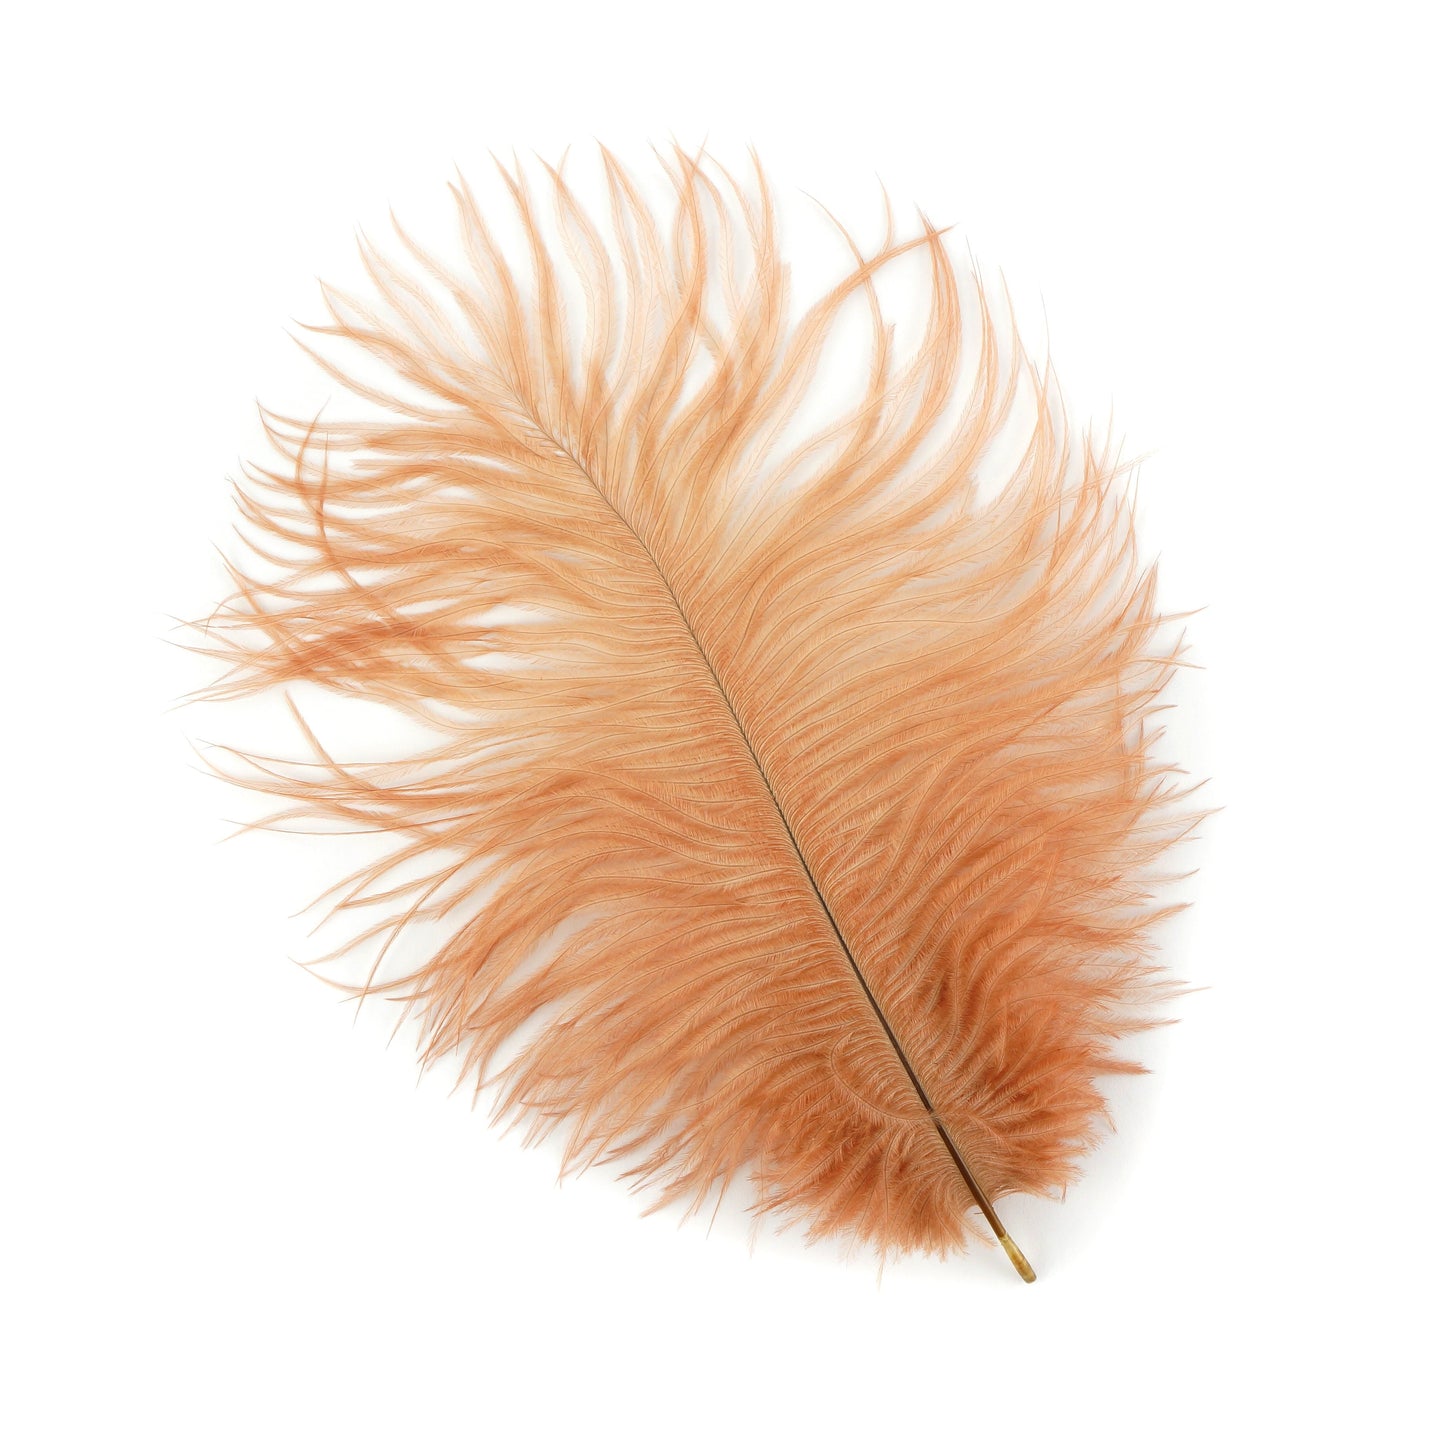 Ostrich Feathers 4-8" Drabs - Cinnamon